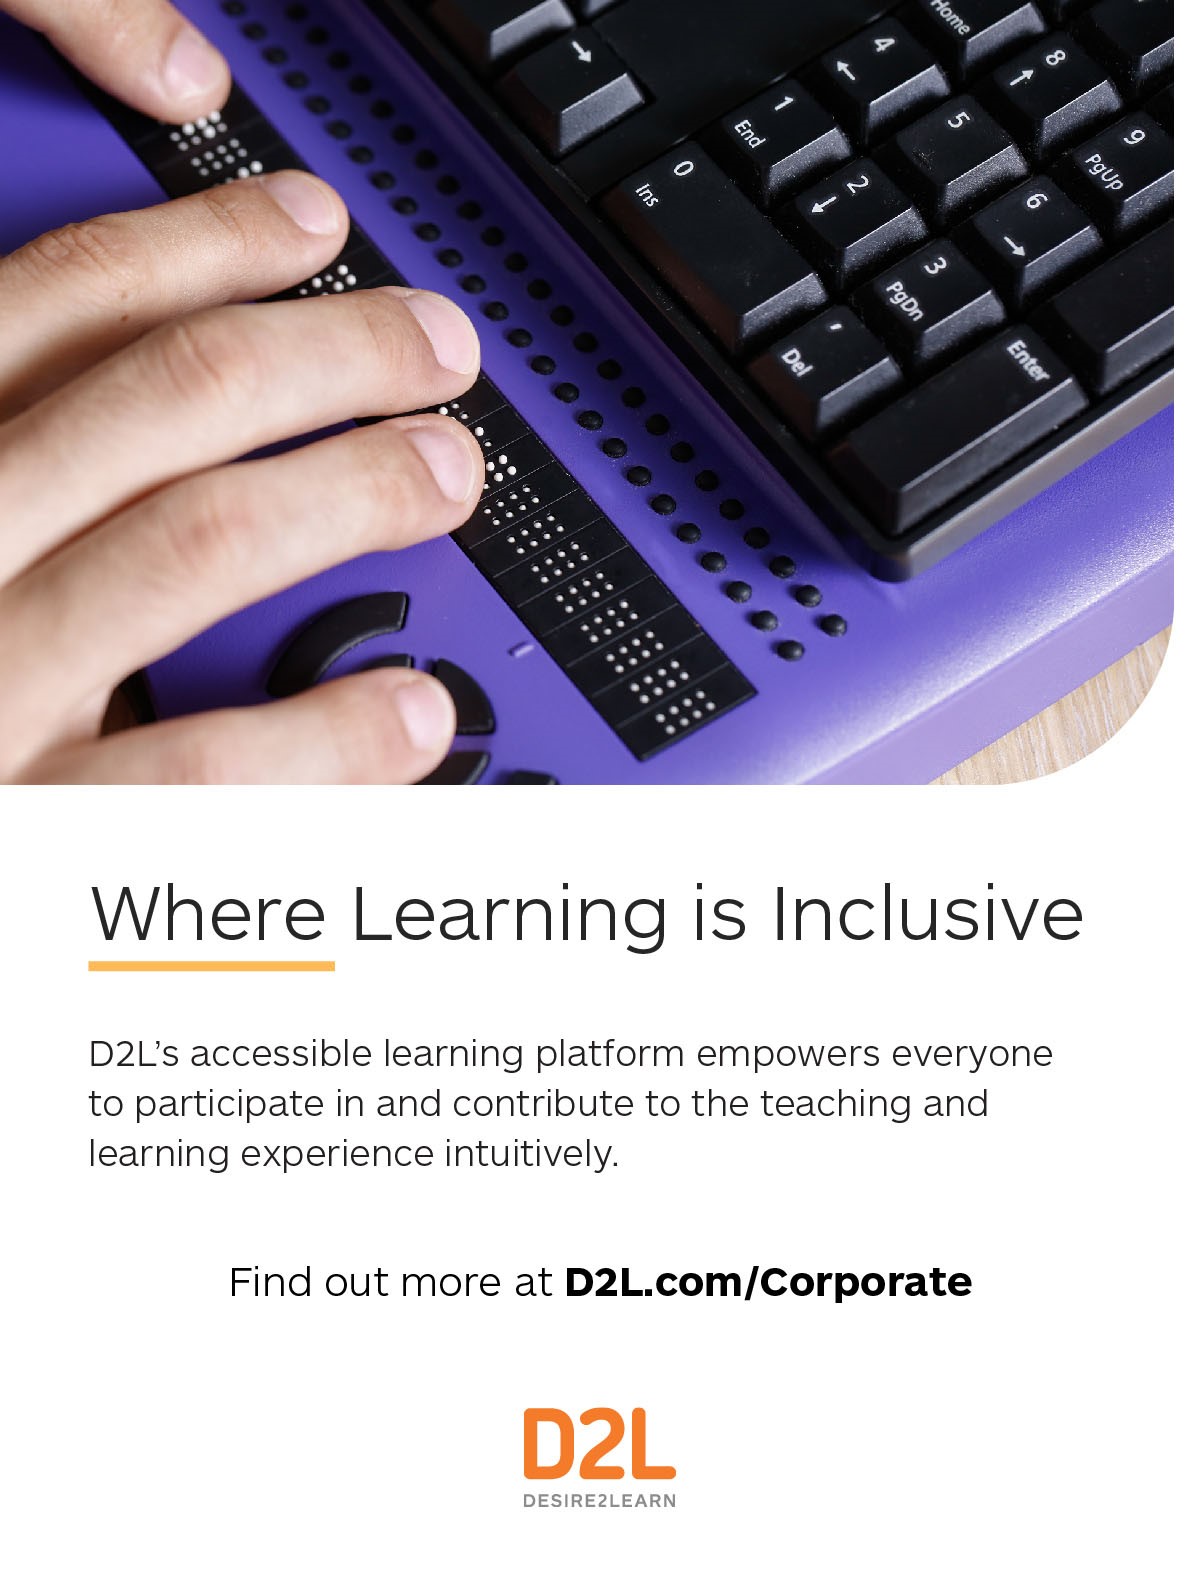 D2L – Where Learning is Inclusive D2L’s accessible learning platform empowers everyone to participate in and contribute to the teaching and learning experience intuitively. Find out more at D2L.com/Corporate. 